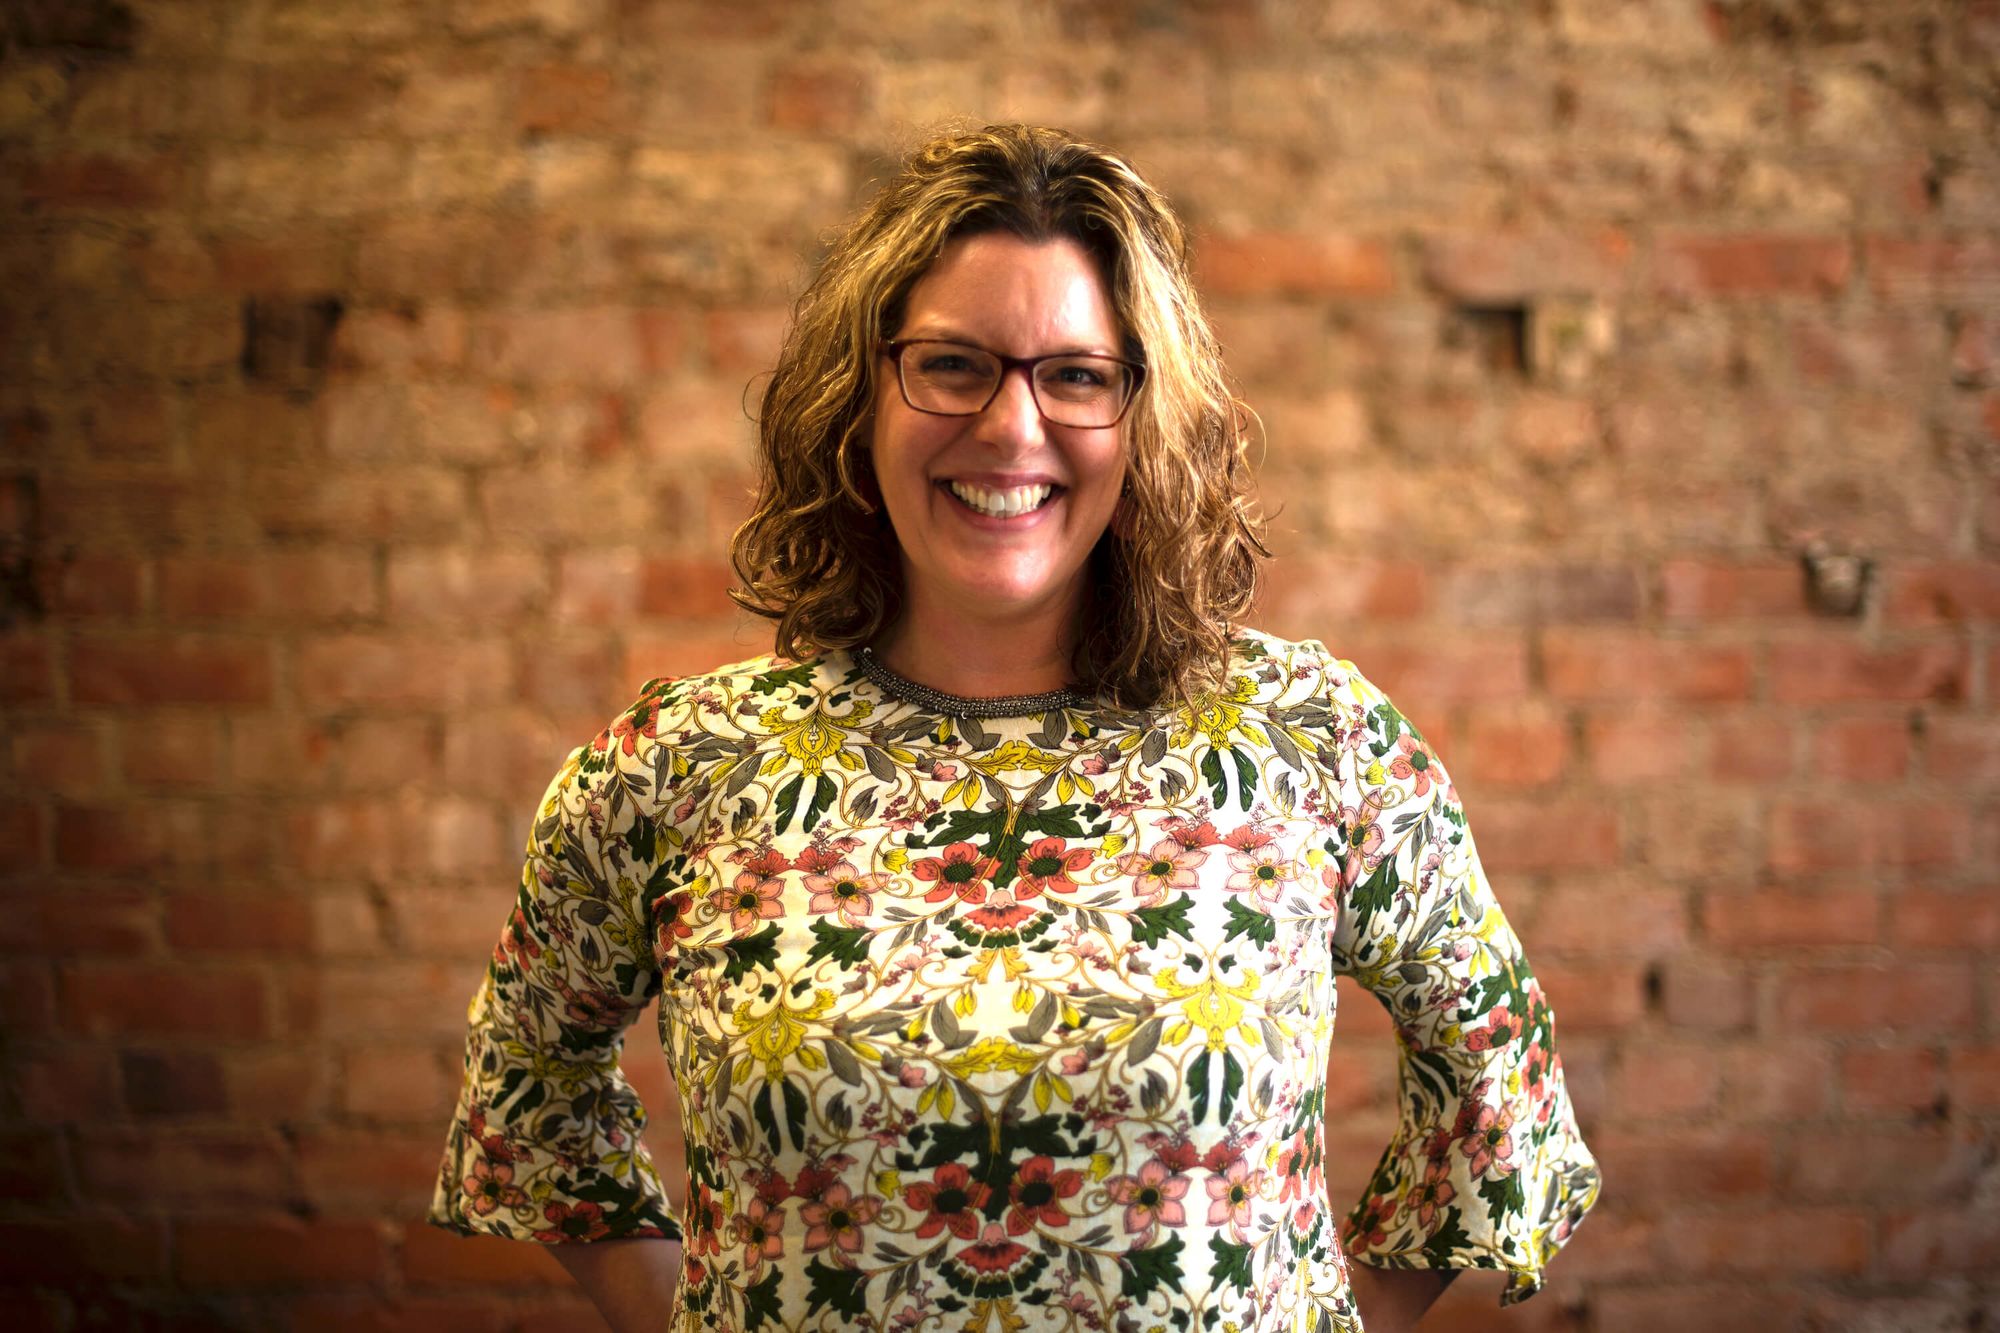 The Clea choice: Meet Content & Social Media Manager Clea Grady